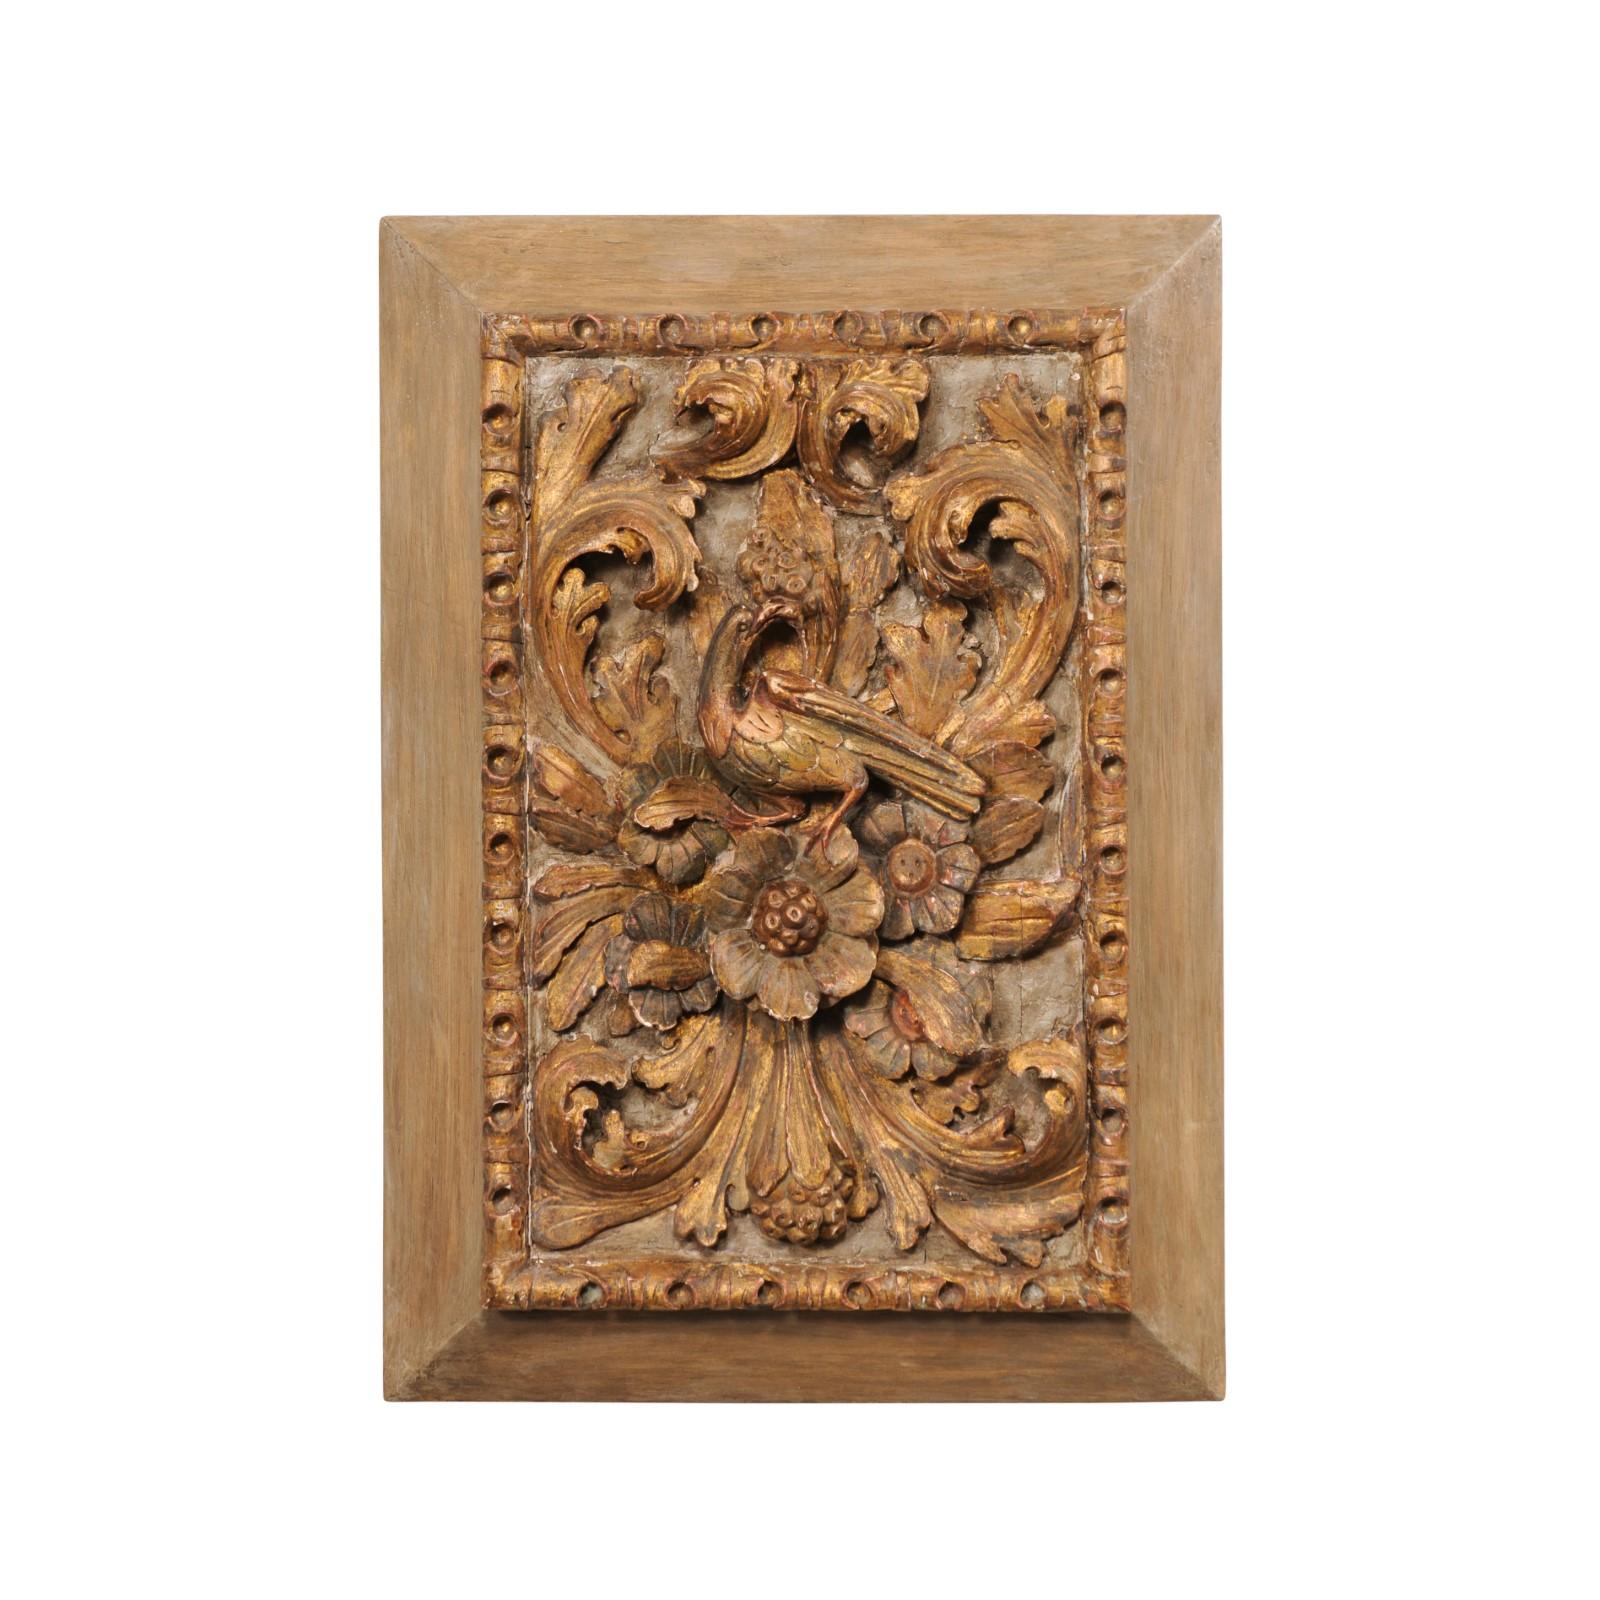 A French carved wood wall plaque, in flowers and bird motif, from the 19th century. This antique wall decoration from France features a rectangular-shaped molded frame, with inner surround comprised of a repeating scrolling acanthus leaf trim, about